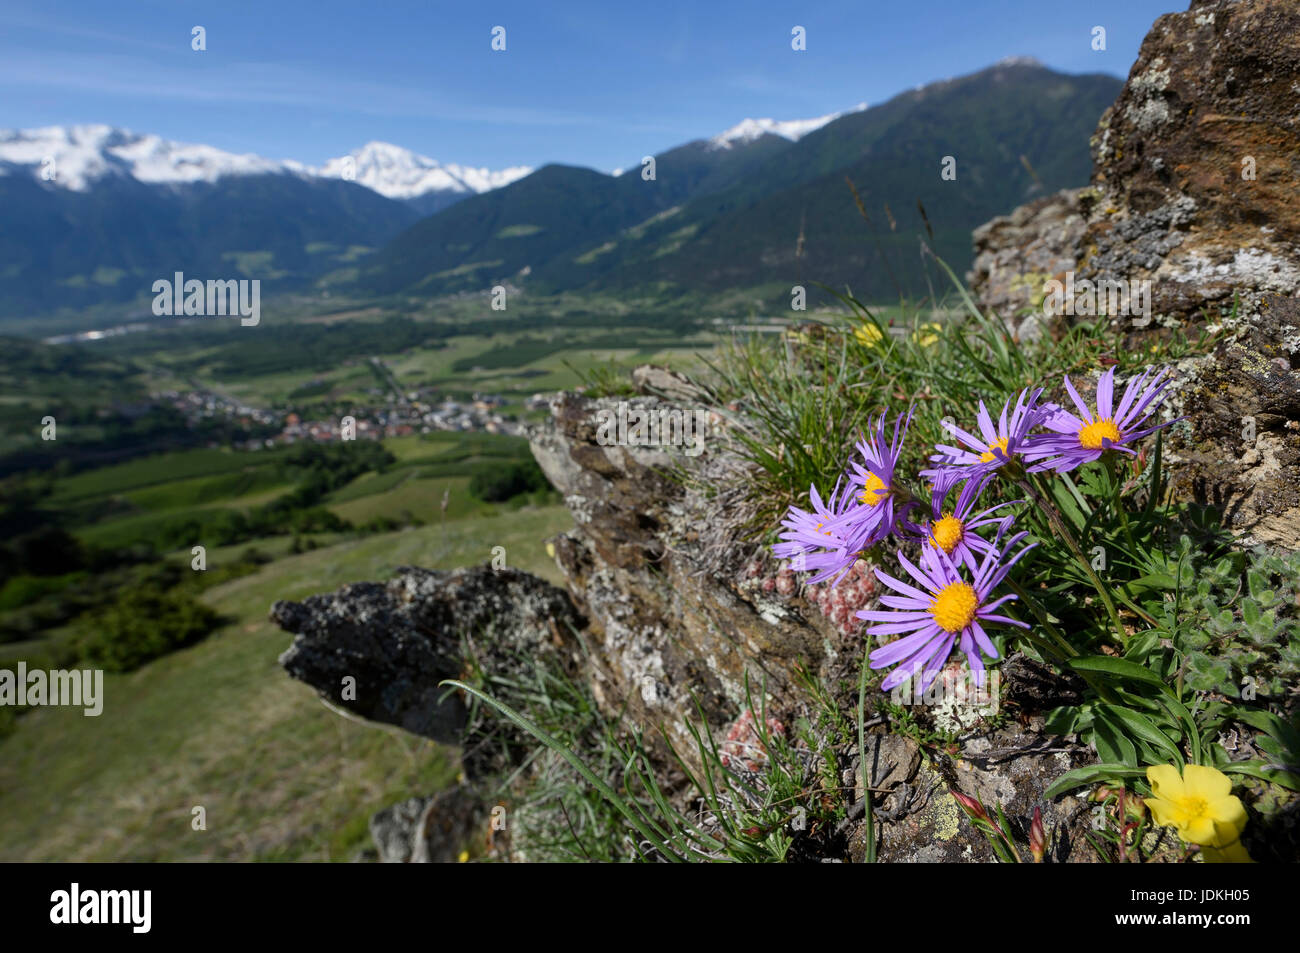 Alpine aster before mountain panorama, aster alonus, Alpen-Aster vor Berg-Panorama, Aster alonus Stock Photo